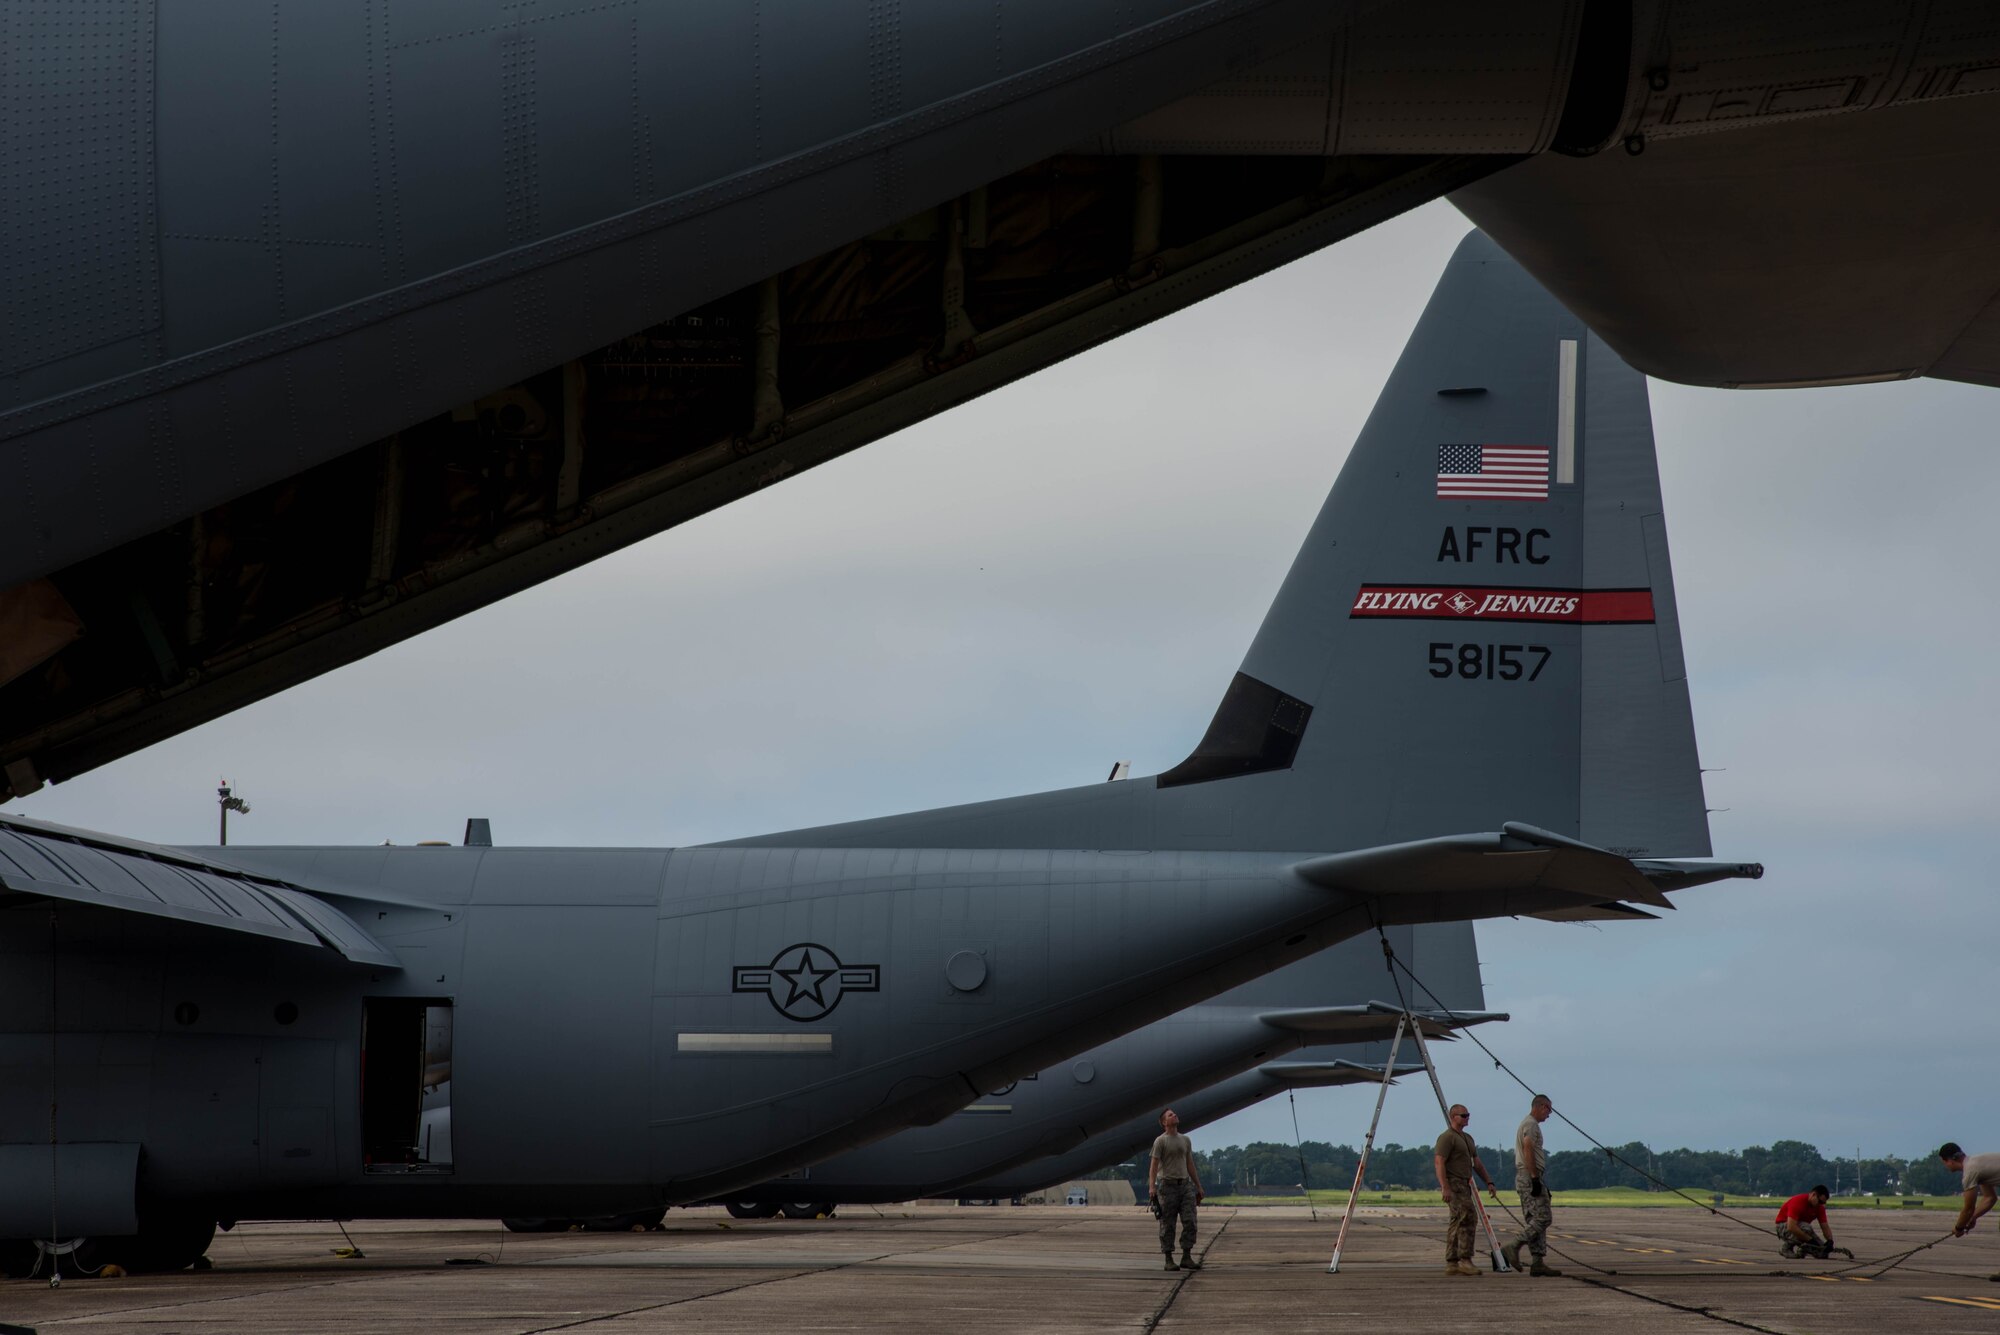 The 815th Airlift Squadron out of Keesler Air Force Base, Miss., flies C-130J "Flying Jennies" shown parked on the flightline at Keesler Air Force Base, Miss., Sept. 28, 2019. In January, the 803rd Aircraft Maintenance Squadron supported the aircraft during a six month deployment in Southwest Asia. (U.S. Air Force photo by Senior Airman Kristen L. Pittman).